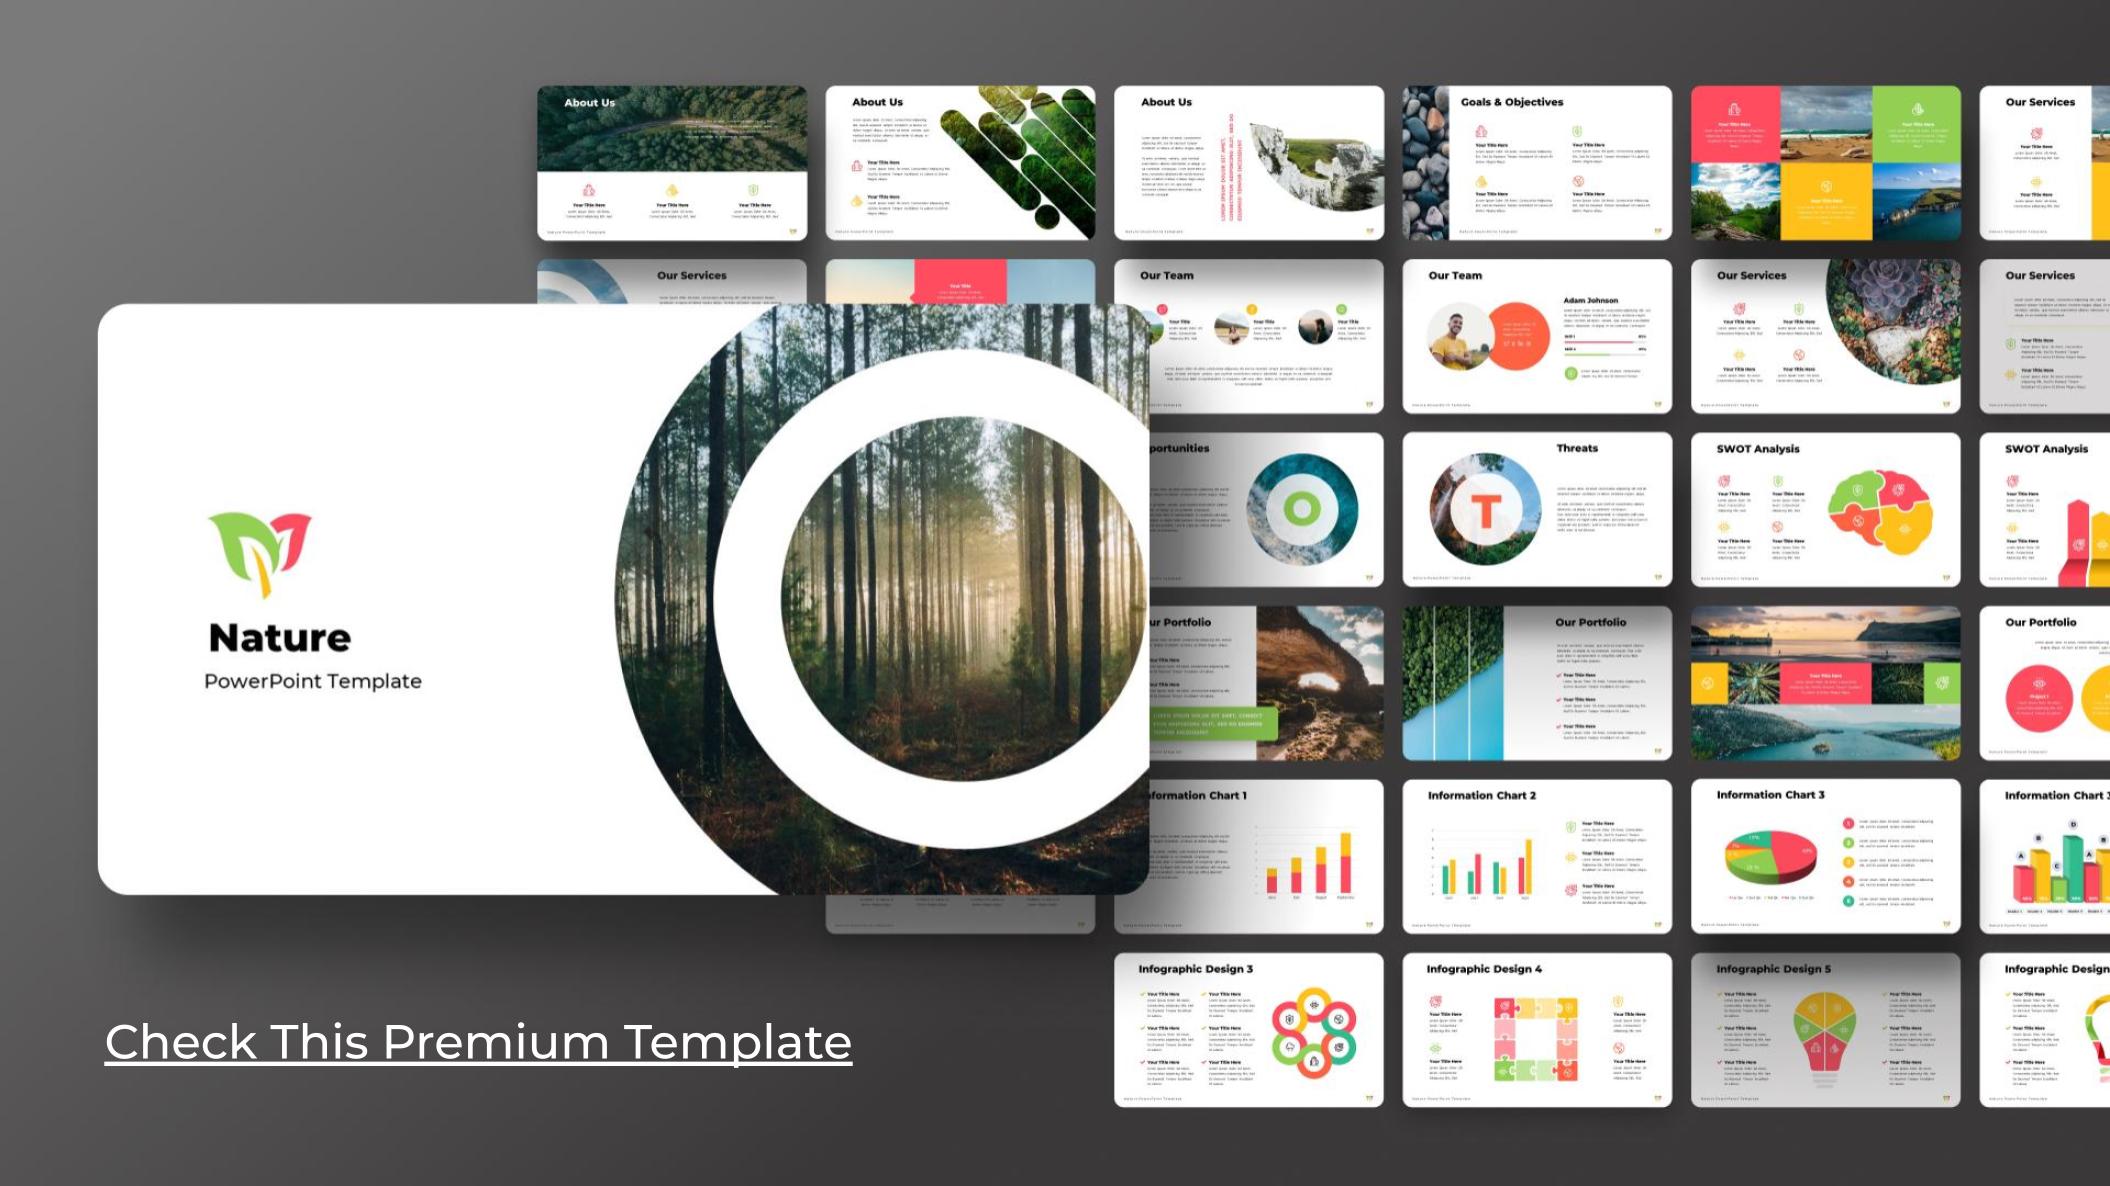 1 nature powerpoint template.pptx 967